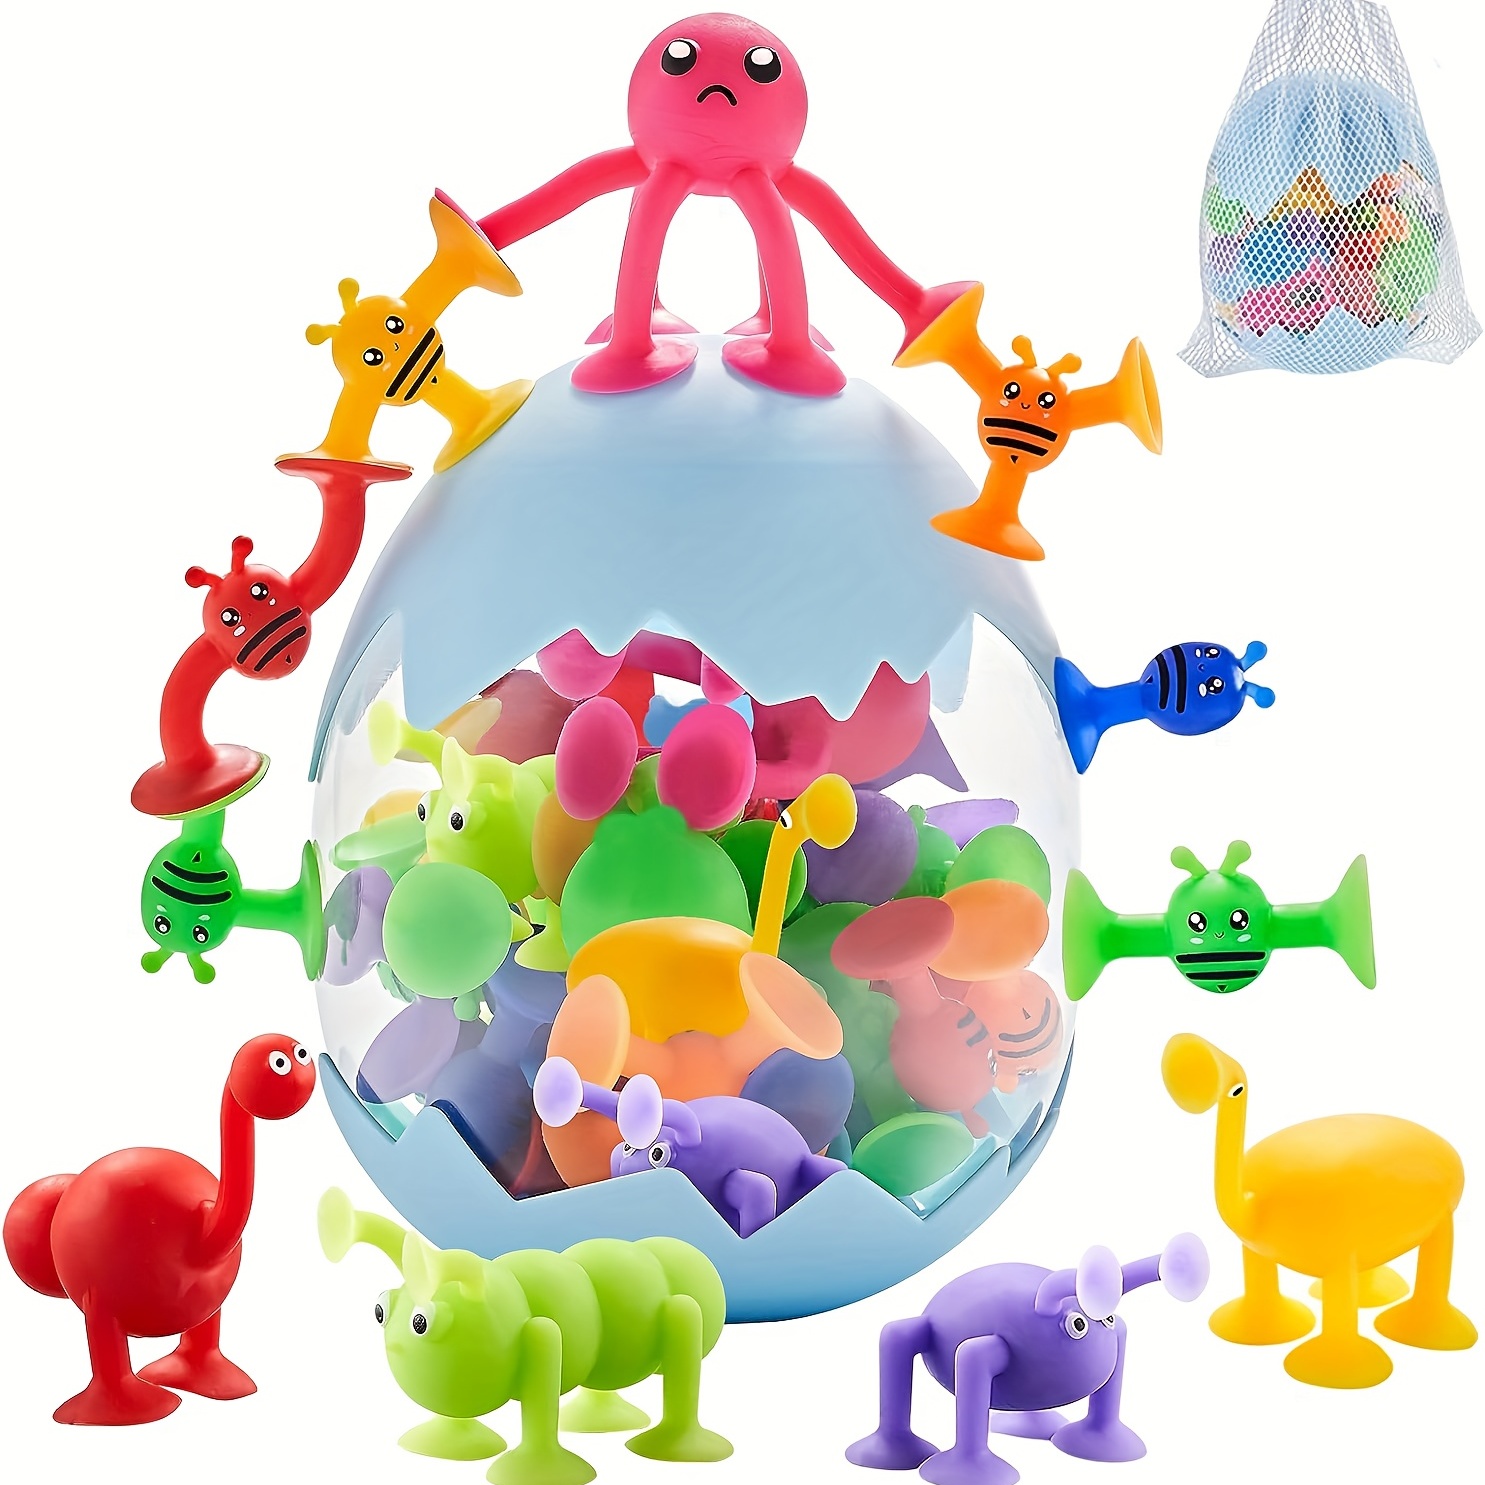 

40pcs Educational Sensory Toys For Kids Ages 3+ - Suction Cup Animals, Dinosaur Eggshell Storage & - Perfect Gift For Boys & Girls!